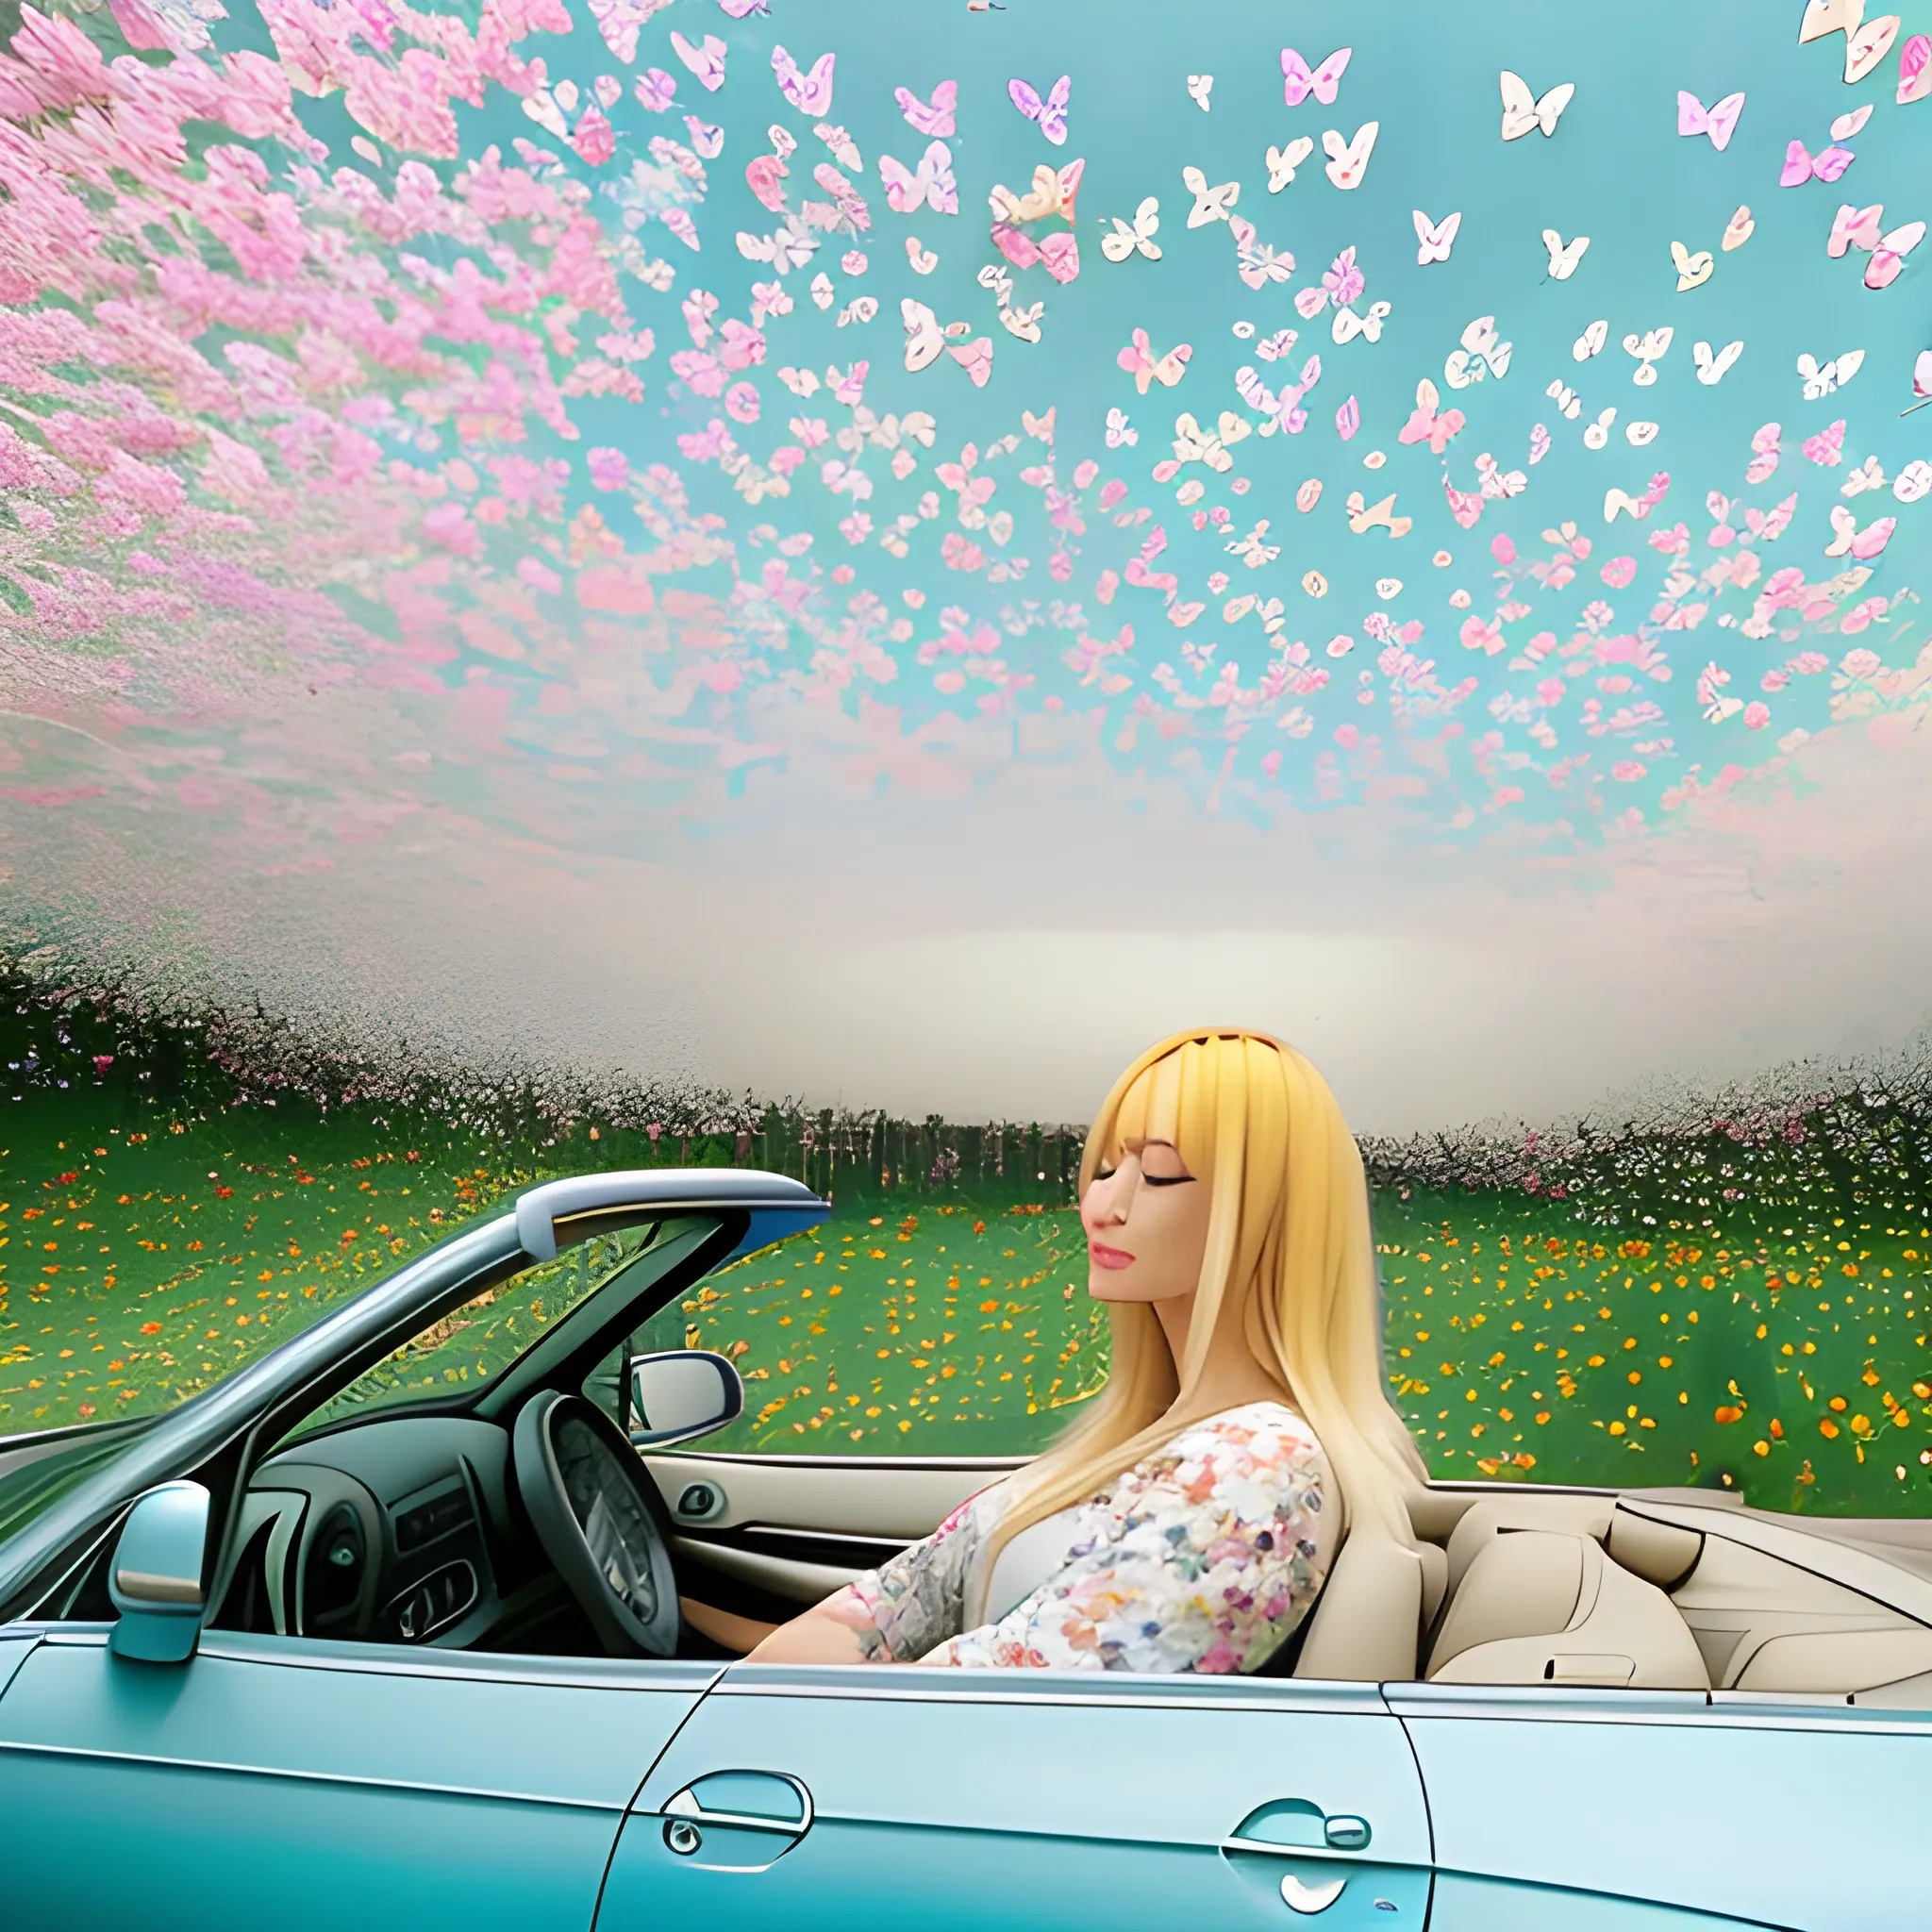 a girl with blonde hair sitting in car filled butterflies, art by Rinko Kawauchi, in the style ofnaturalistic poses, vacation dadcore, youthfulenergy, a coolexpression, body extensions, flowersin the sky, analog film, super detail, dreamy lofiphotography, colourful, covered in flowers andvines, Inside view, shot on fujifilm XT4 --q 2 --v 5 --ar 3:4

